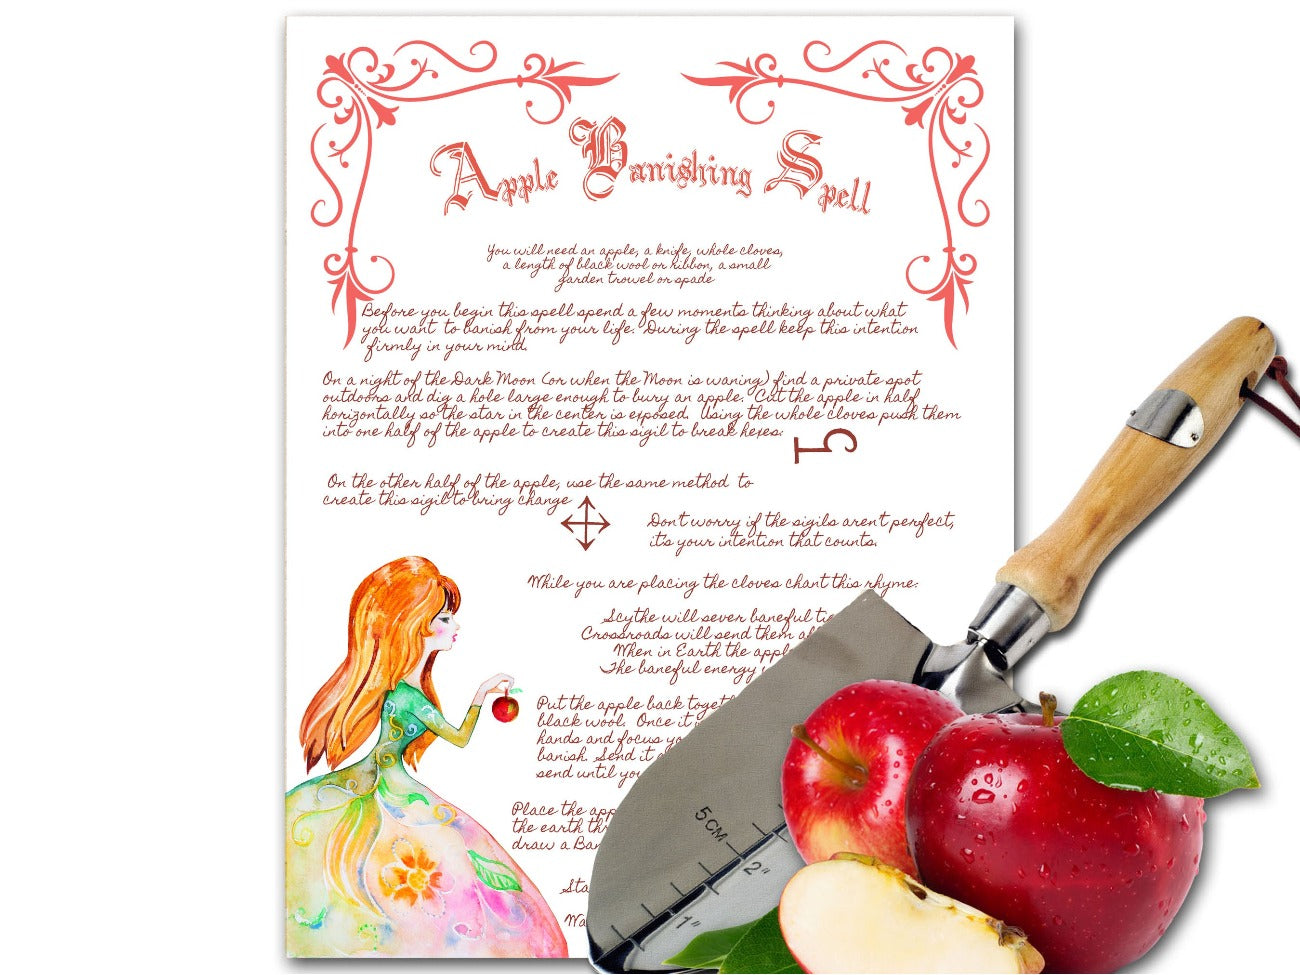 APPLE BANISHING SPELL, APPLE BANISHING SPELL, Charmed Style Spell, Wicca Witchcraft  Poison Apple